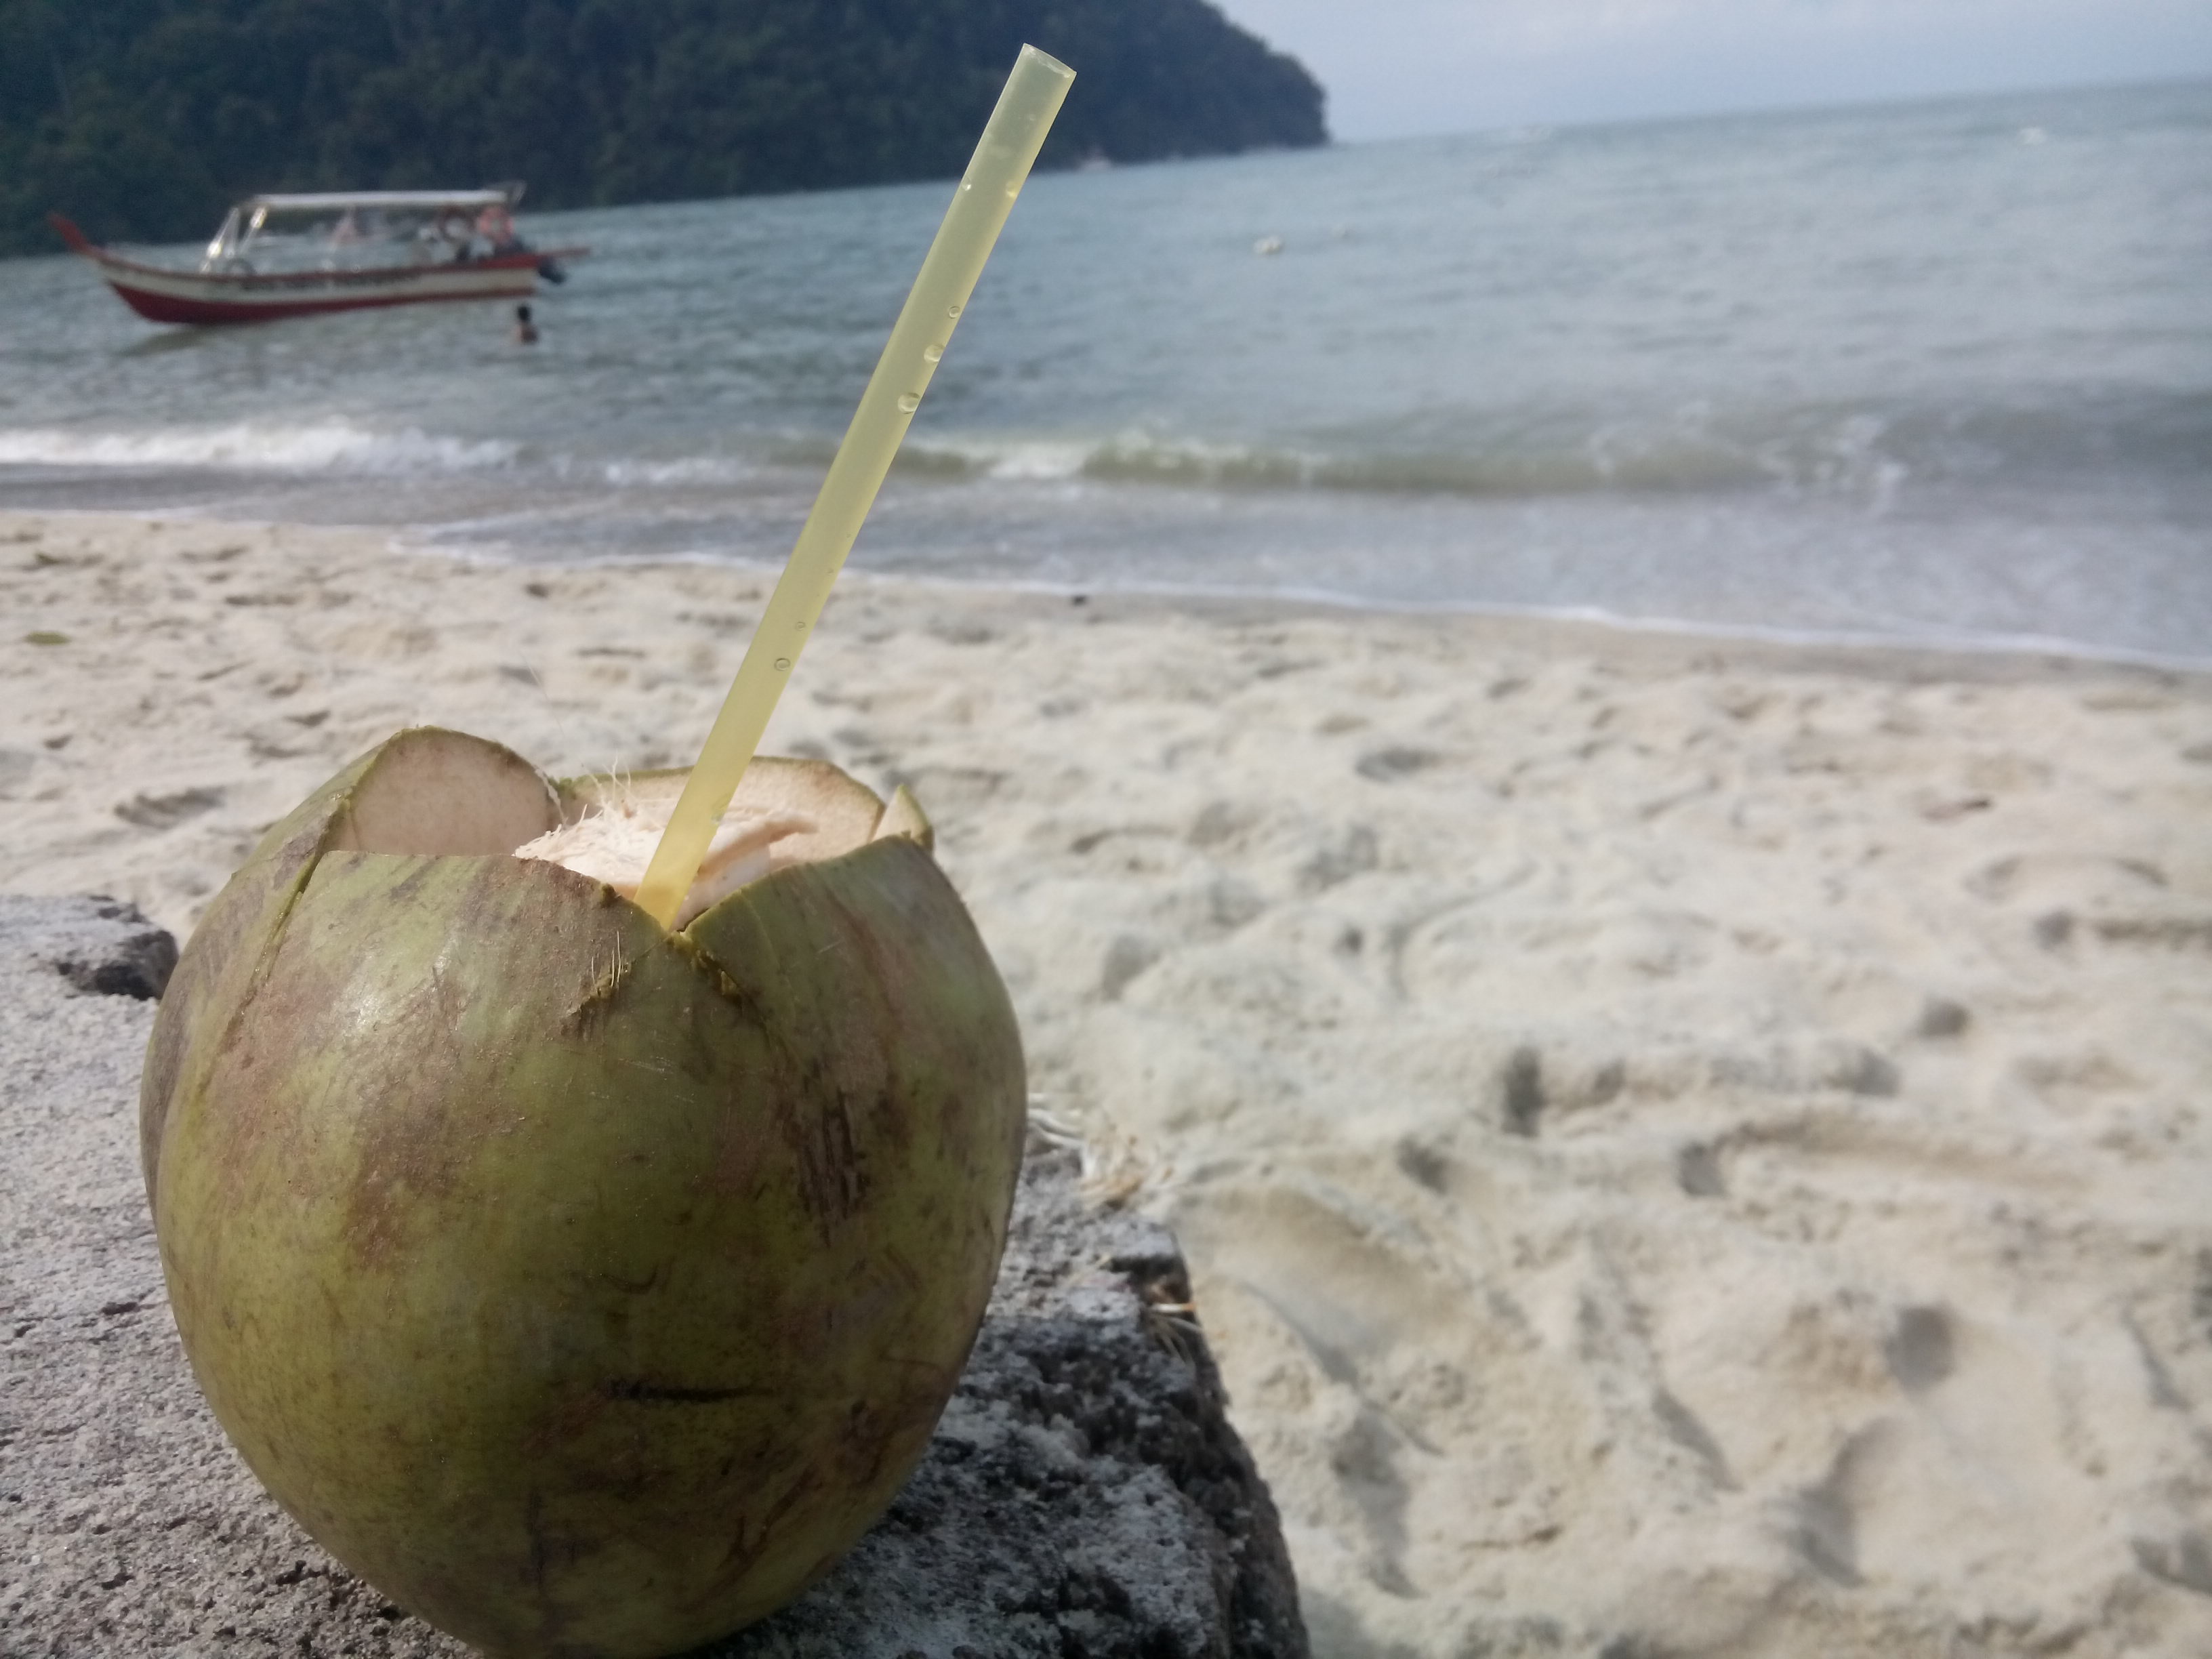 A coconut with a straw in it in the foreground, against a beach, and sea with a boat in the background